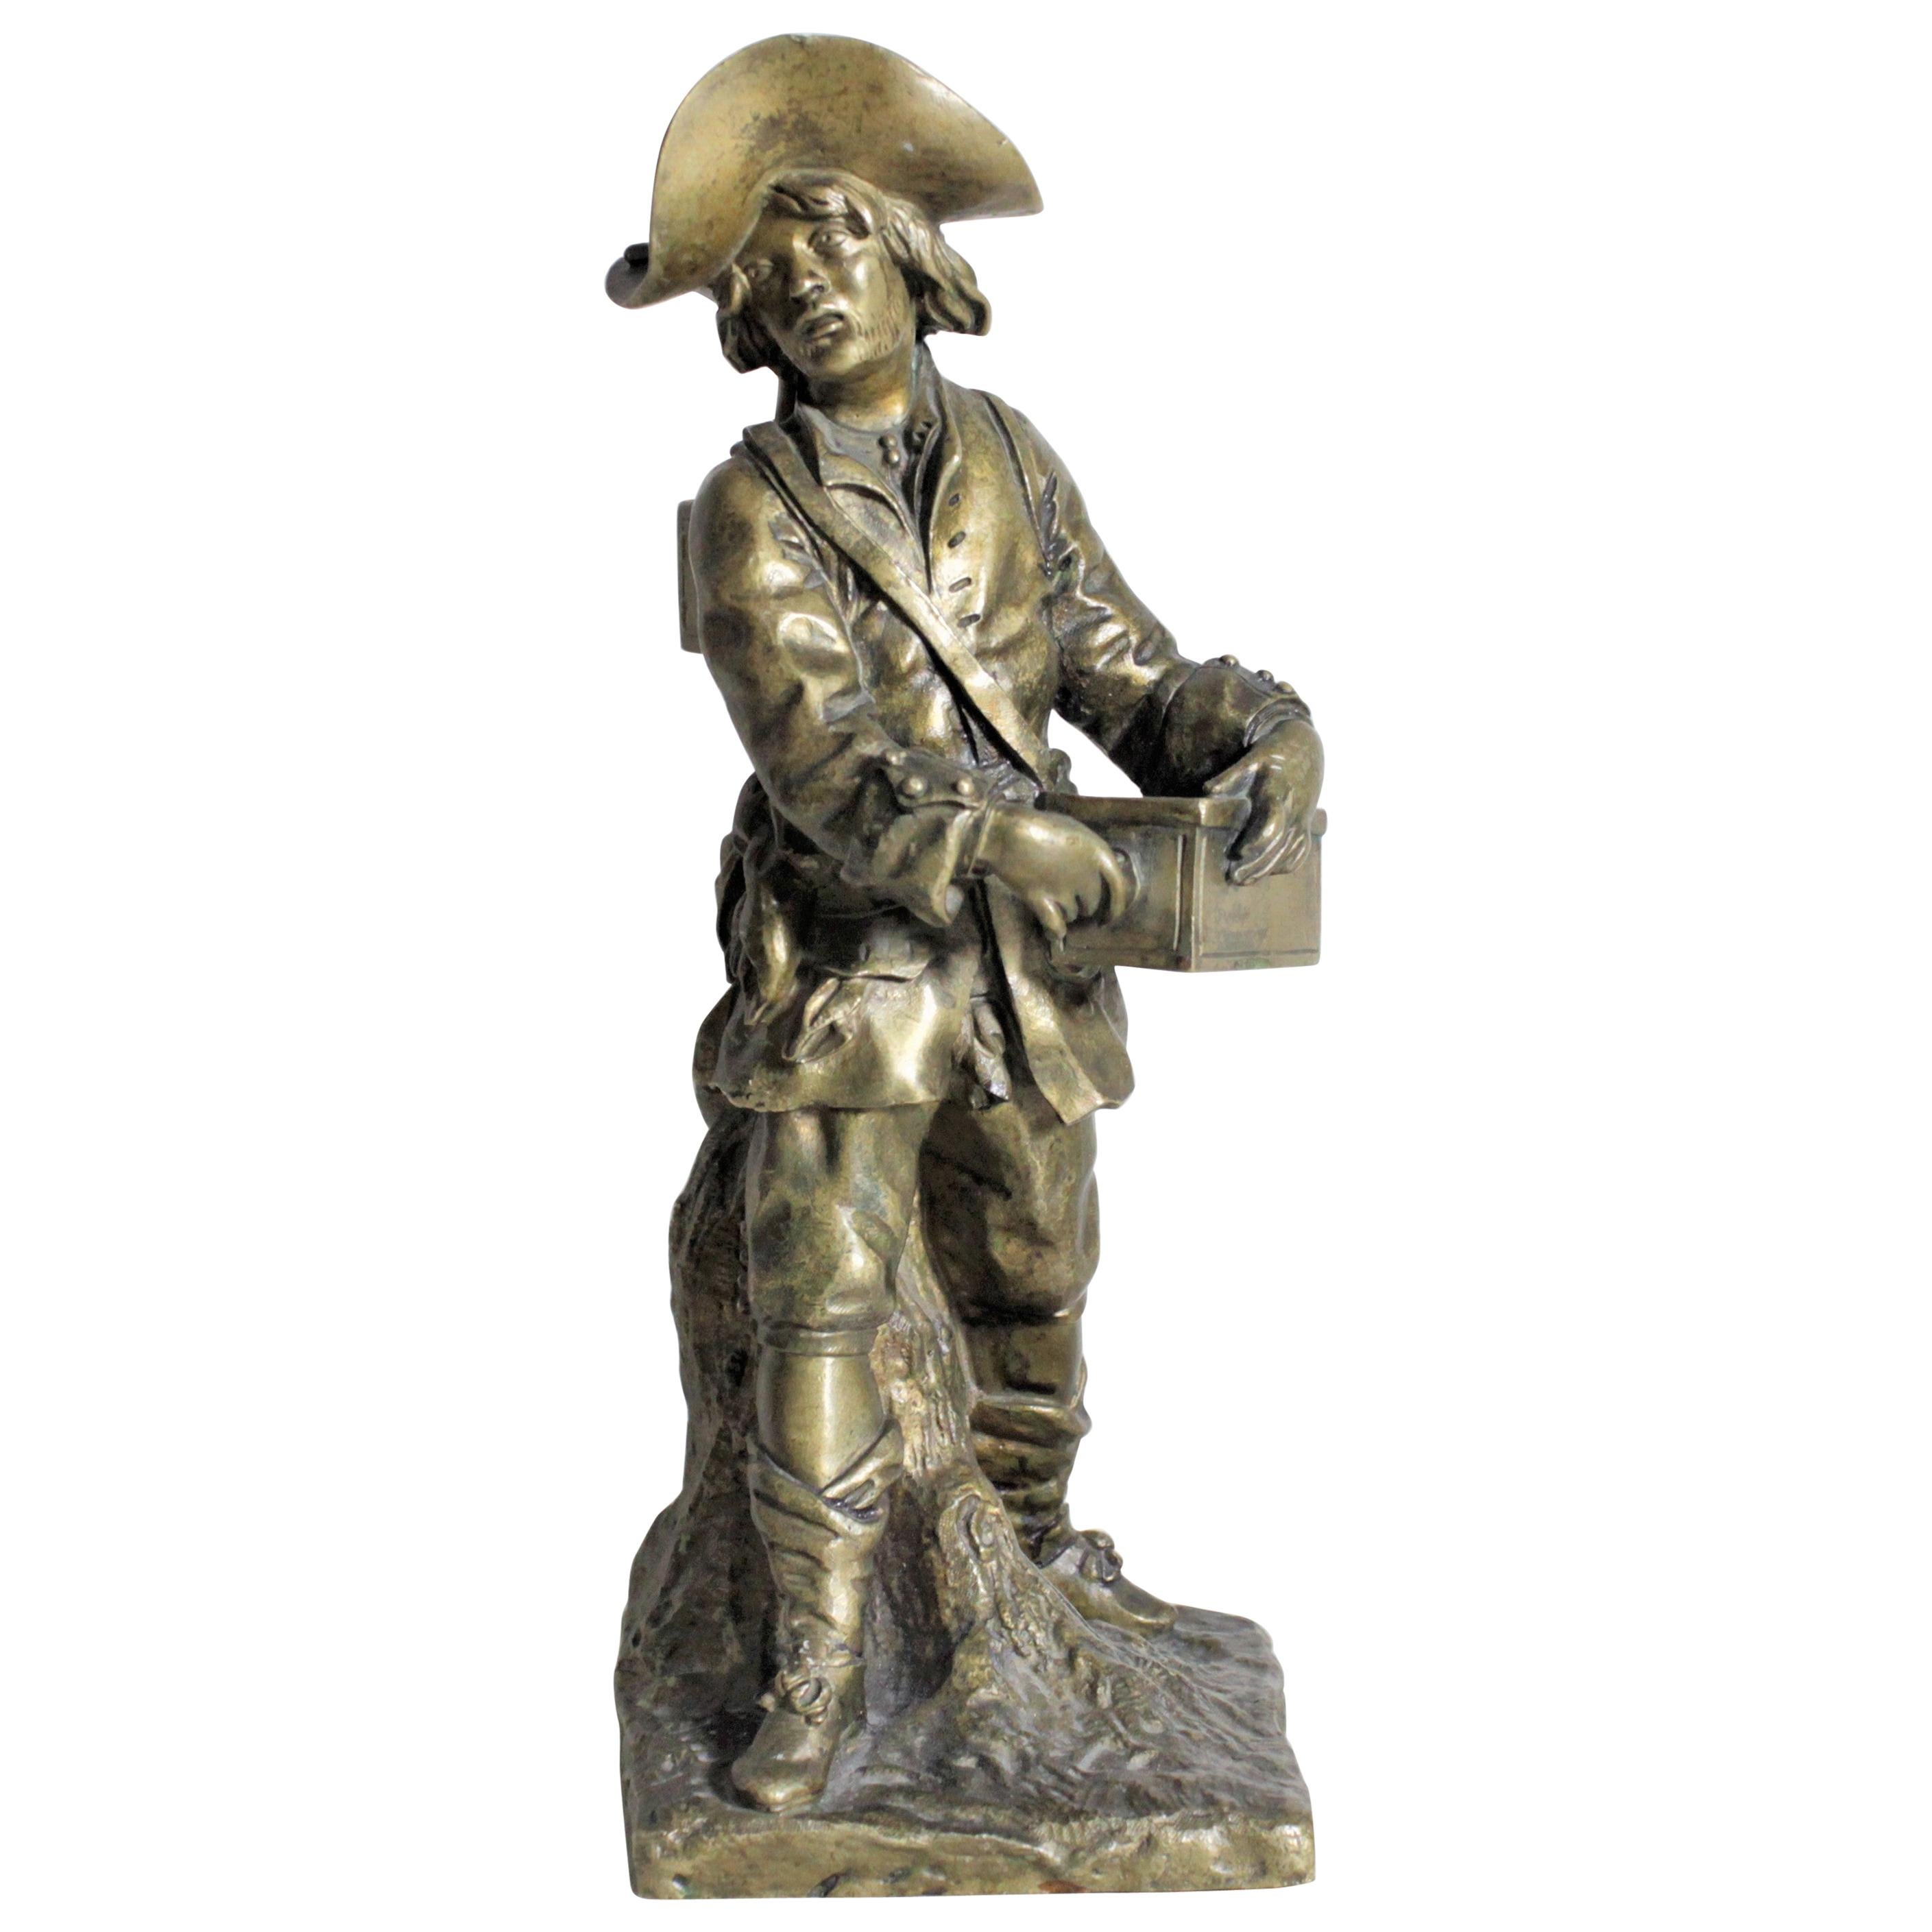 Antique Bronze Sculpture of a Young Victorian Male Wandering Showman